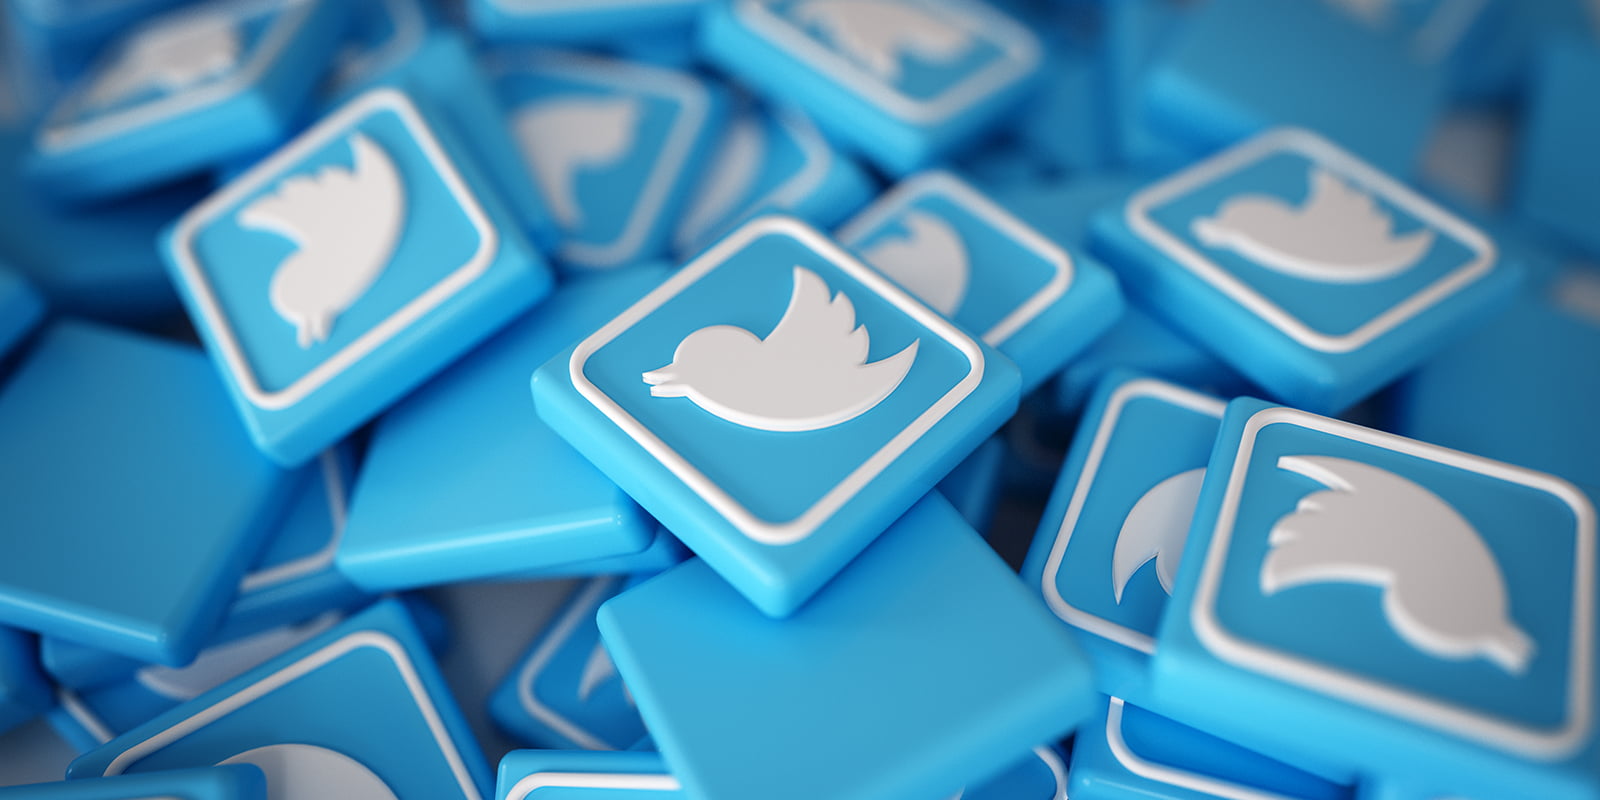 Twitter Deal Is On Hold Over Fake Twitter Account Details